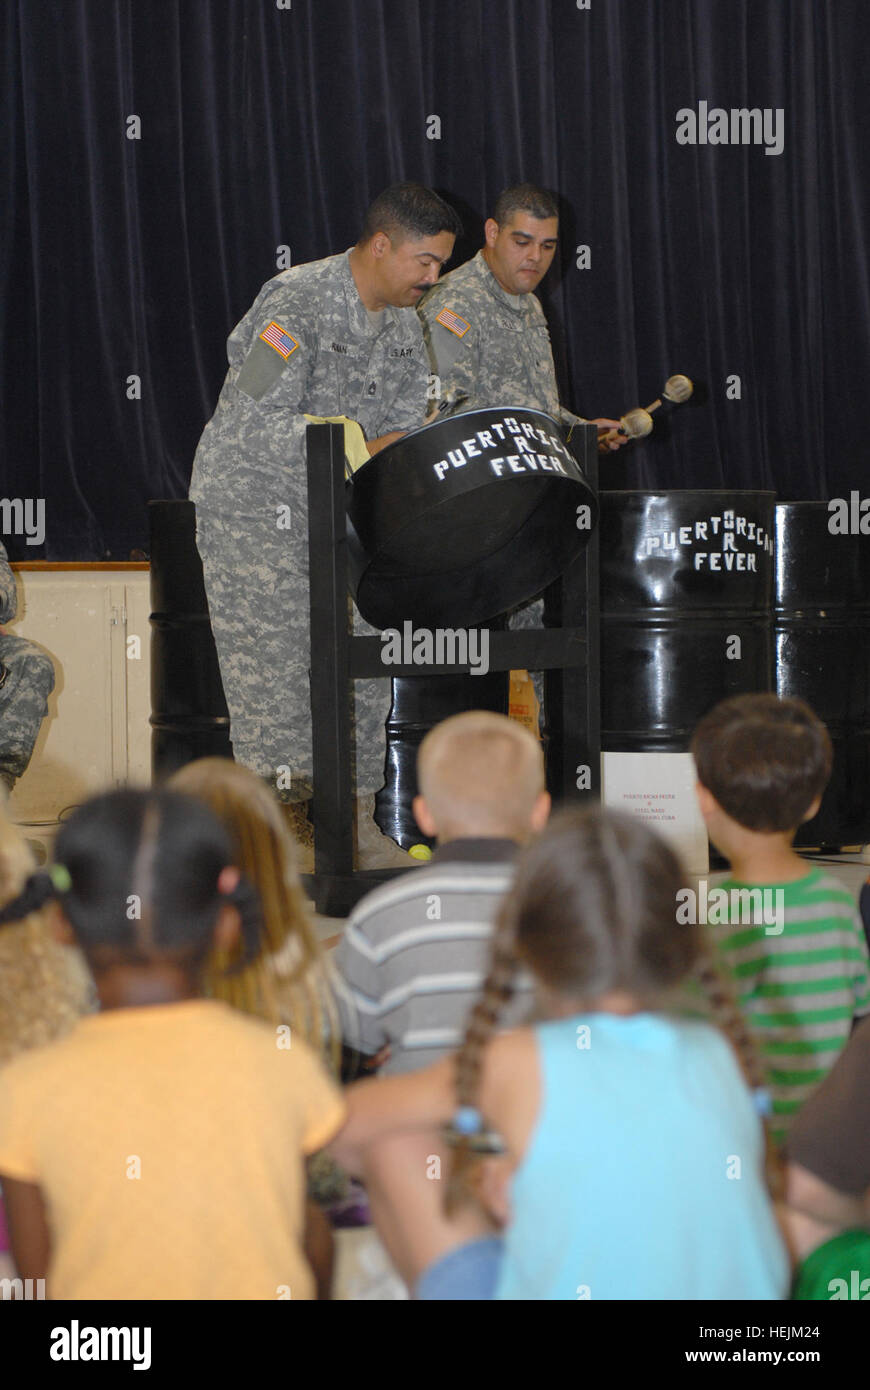 GUANTANAMO BAY, Cuba – Army Sgt. 1st Class Rafael Roman and Sgt. Jose Rojas, members of Puerto Rican Fever, an all-Soldier steel drum band, perform for children at W.T. Sampson Elementary School during Hispanic Heritage Month, Oct. 6, 2009. The Soldiers, deployed to Joint Task Force Guantanamo in support of detention operations, formed the band and made the drums by hand over a period of three months and now perform regularly for audiences around JTF Guantanamo and U.S. Naval Station Guantanamo Bay during their off-duty hours. JTF Guantanamo conducts safe, humane, legal and transparent care an Stock Photo